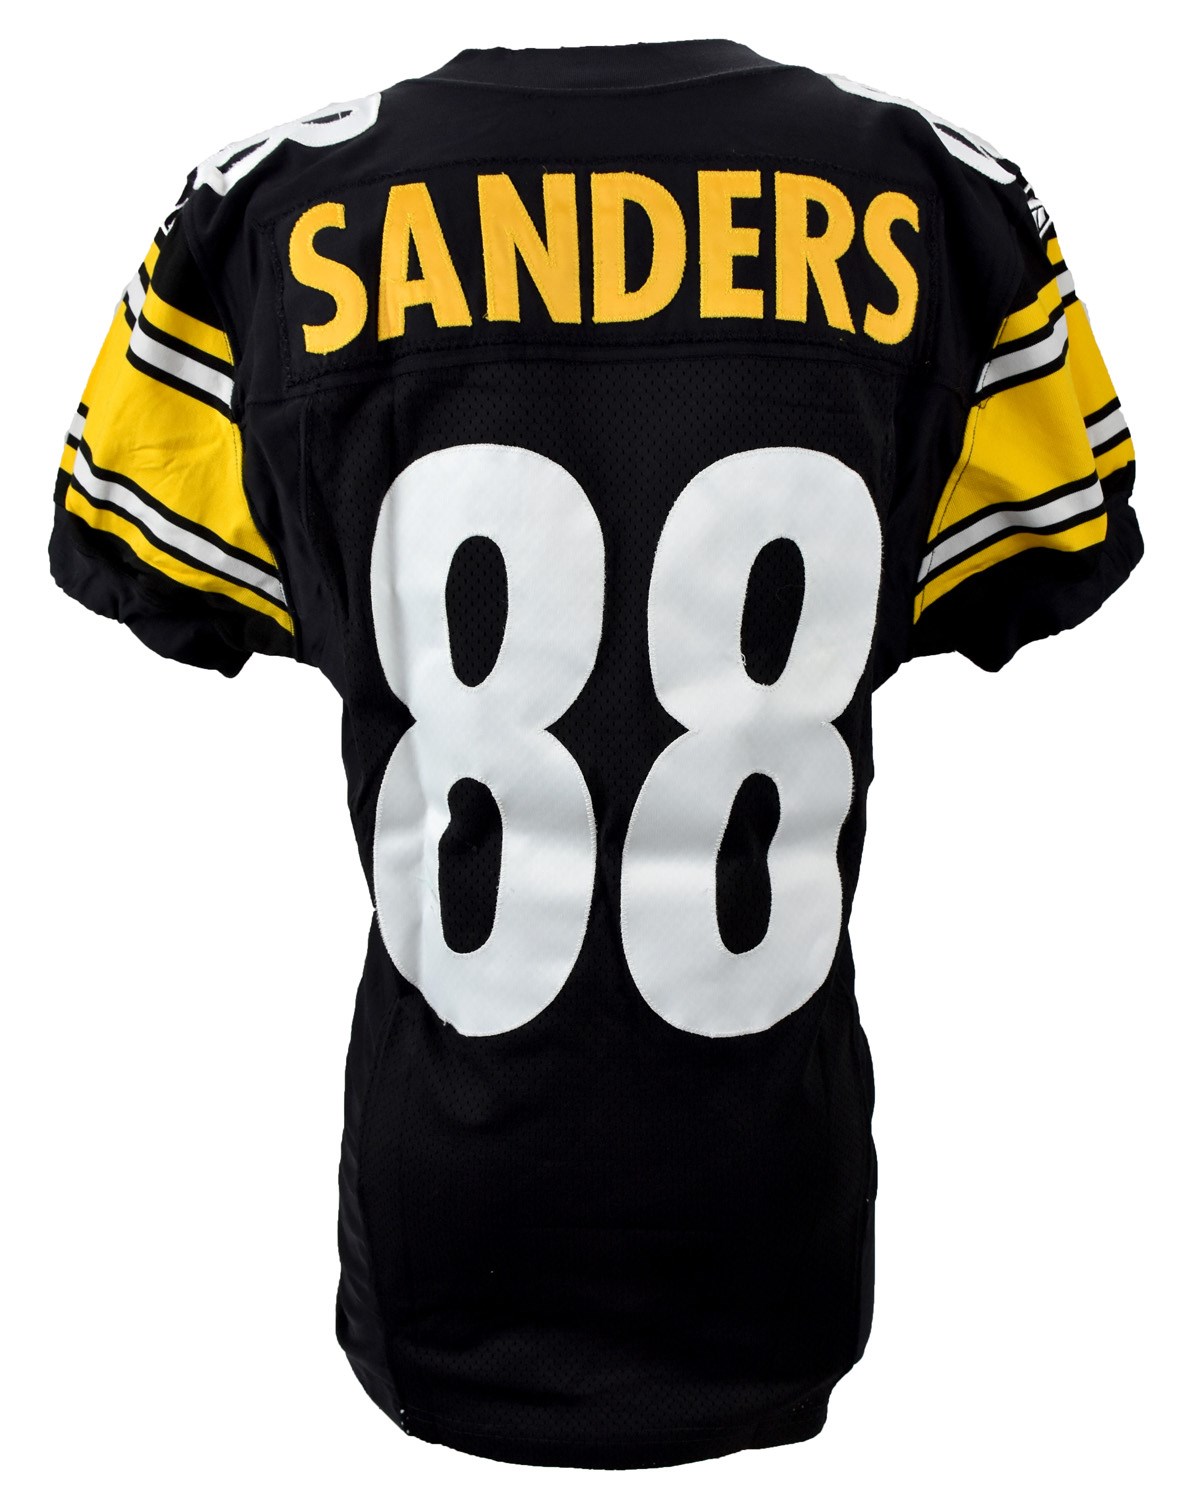 - 2011 Emmanuel Sanders Pittsburgh Steelers Game Worn Jersey - Photo-Matched to Multiple Games (Resolution Photomatching LOA)